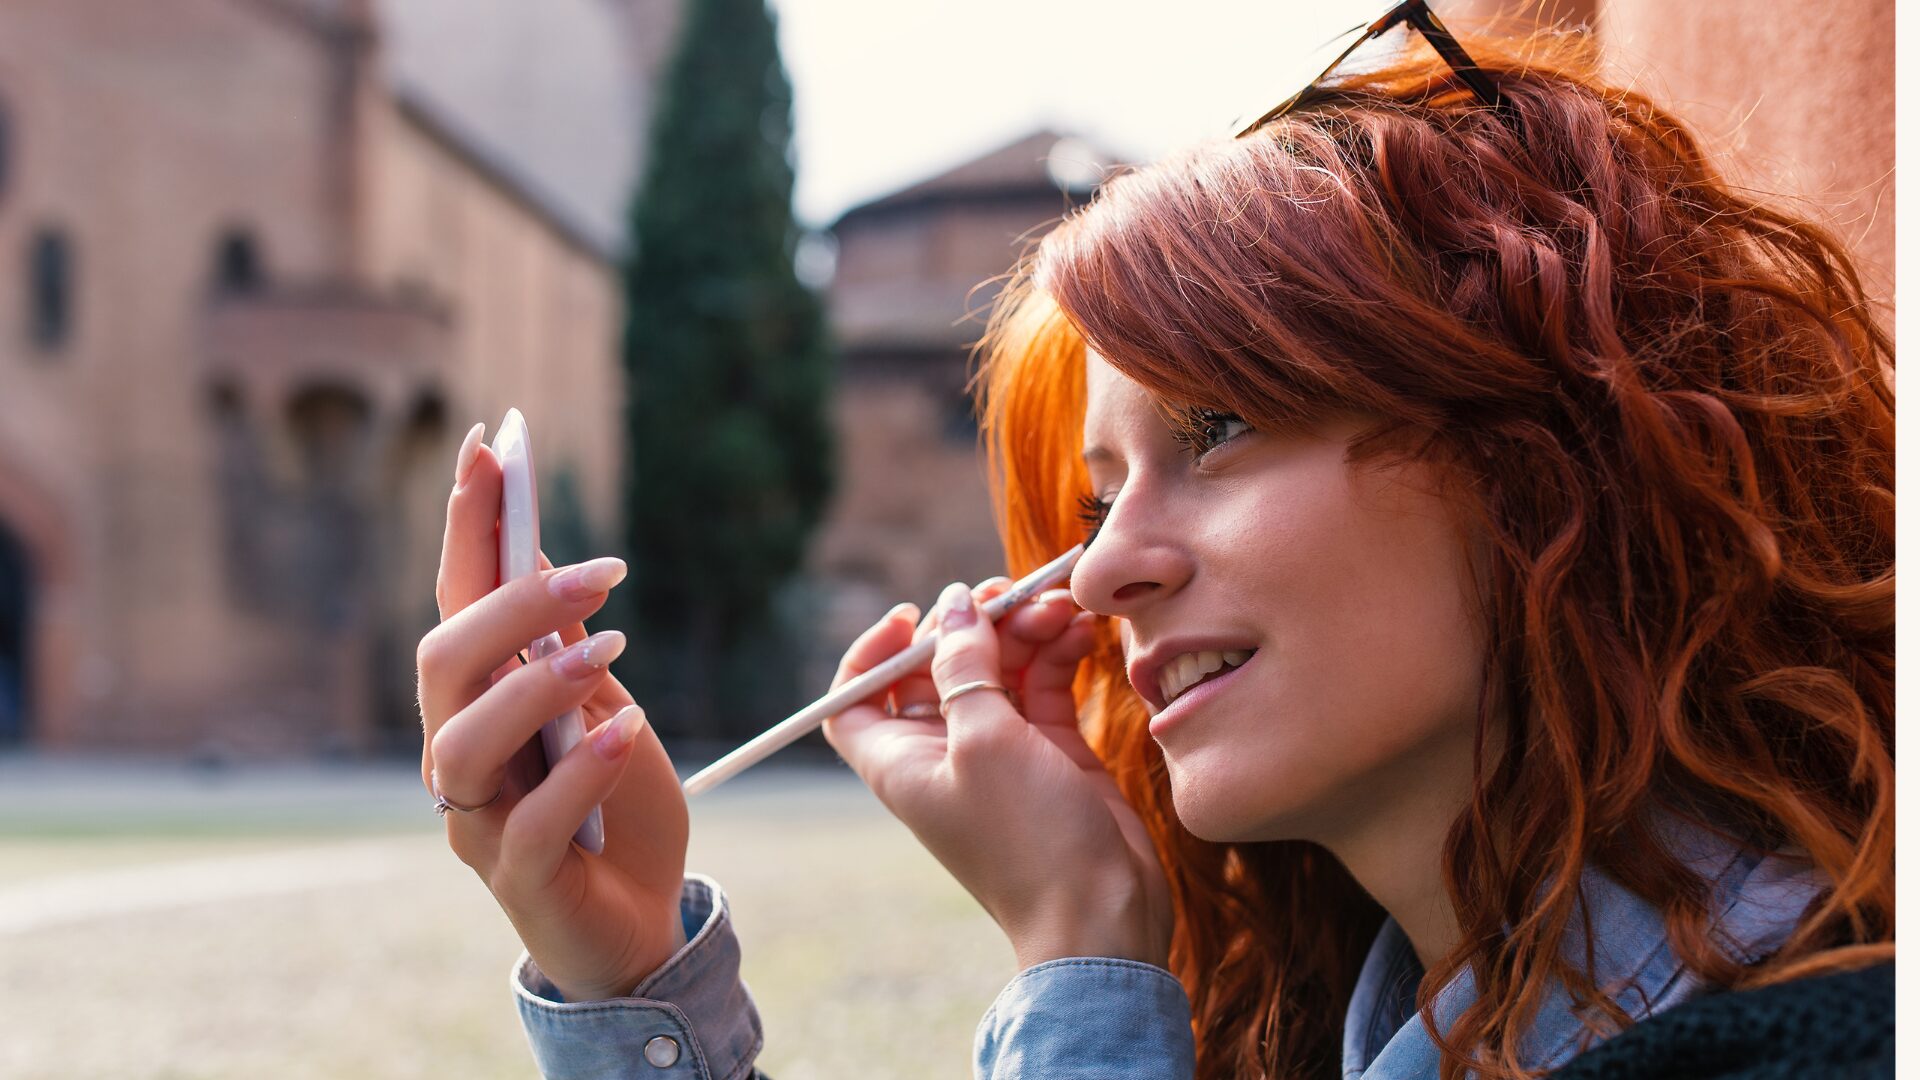 Sponges vs. Makeup Brushes: Which One Should Redheads Use?